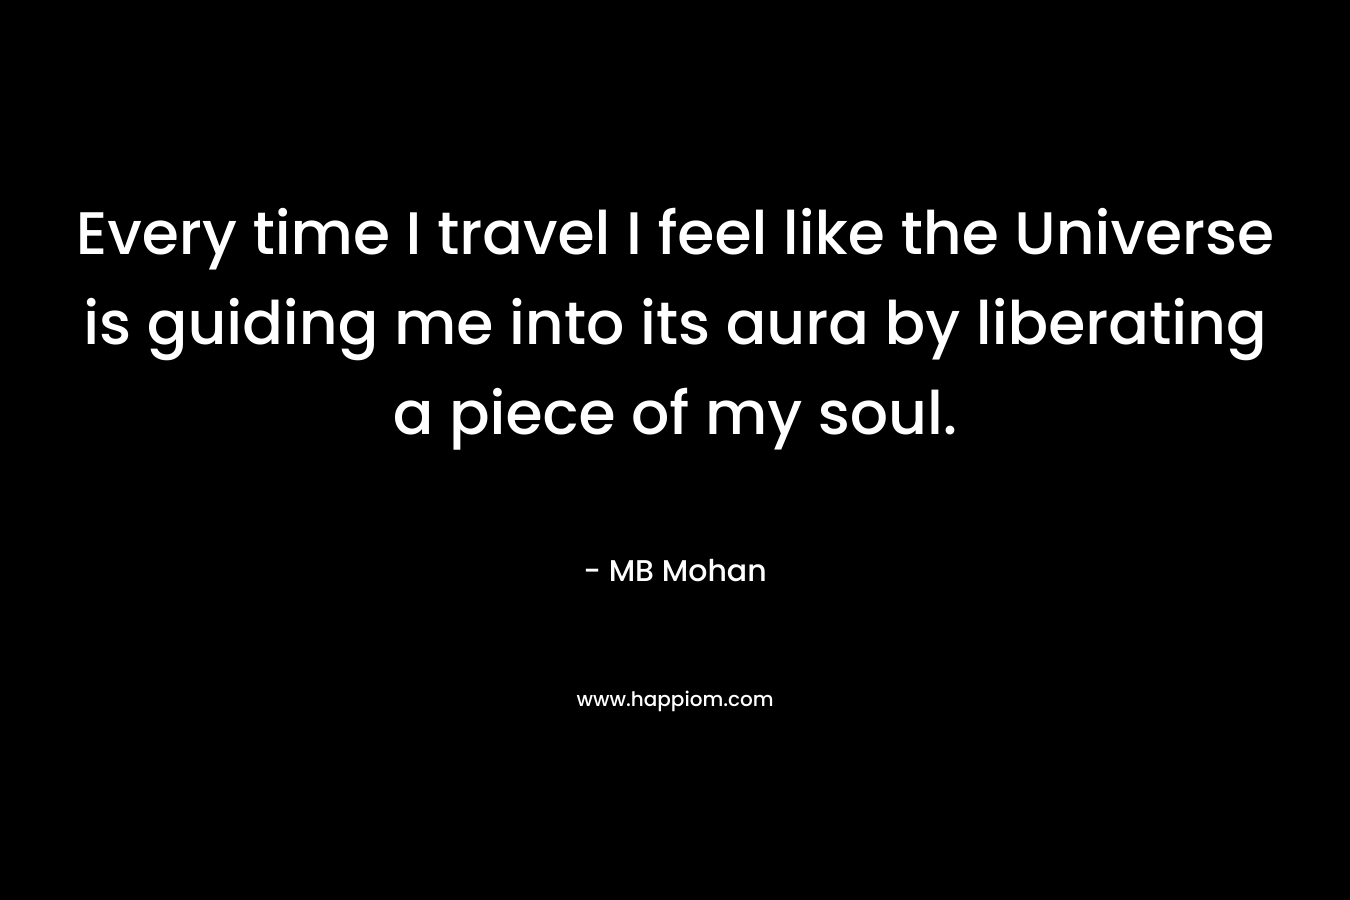 Every time I travel I feel like the Universe is guiding me into its aura by liberating a piece of my soul. – MB Mohan